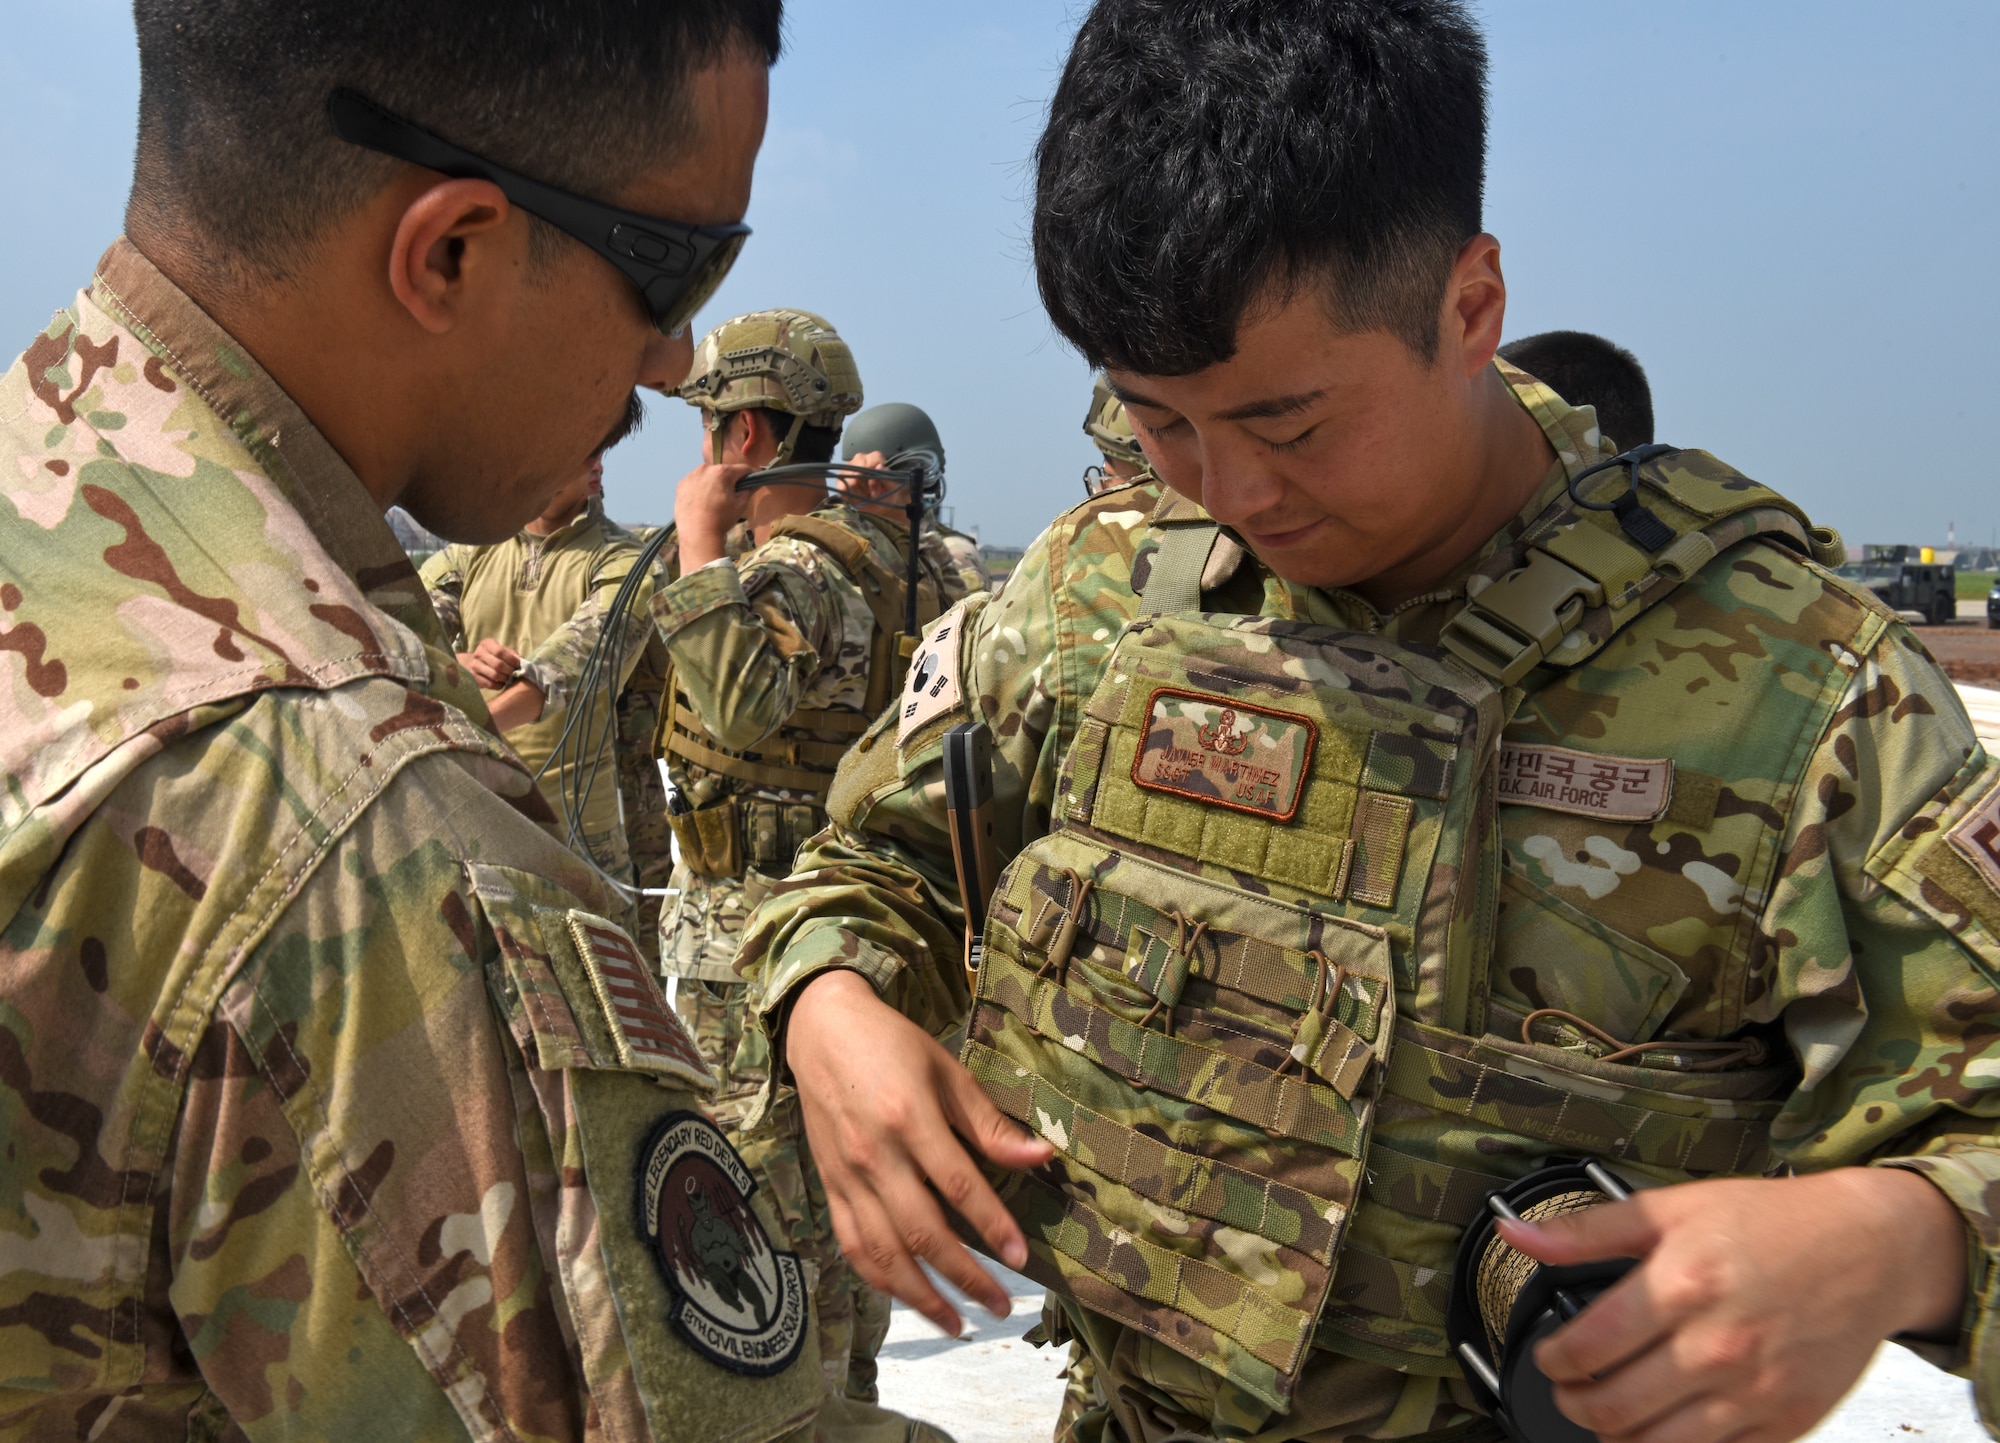 Staff Sgt. Javier Martinez, 8th Civil Engineer Squadron Explosive Ordnance Disposal technician, assists Master Sgt. Myung-Hyung Oh, 38th Fighter Group EOD technician, in putting on individual protective equipment during ordnance disposal training at Kunsan Air Base, Republic of Korea, Aug. 22, 2019. The 8th CES EOD unit partnered with the Republic of Korea Air Force’s 38th FG EOD unit to conduct joint ordnance disposal training, share response procedures and focus on enhancing mission capabilities. (U.S. Air Force photo by Staff Sgt. Mackenzie Mendez)